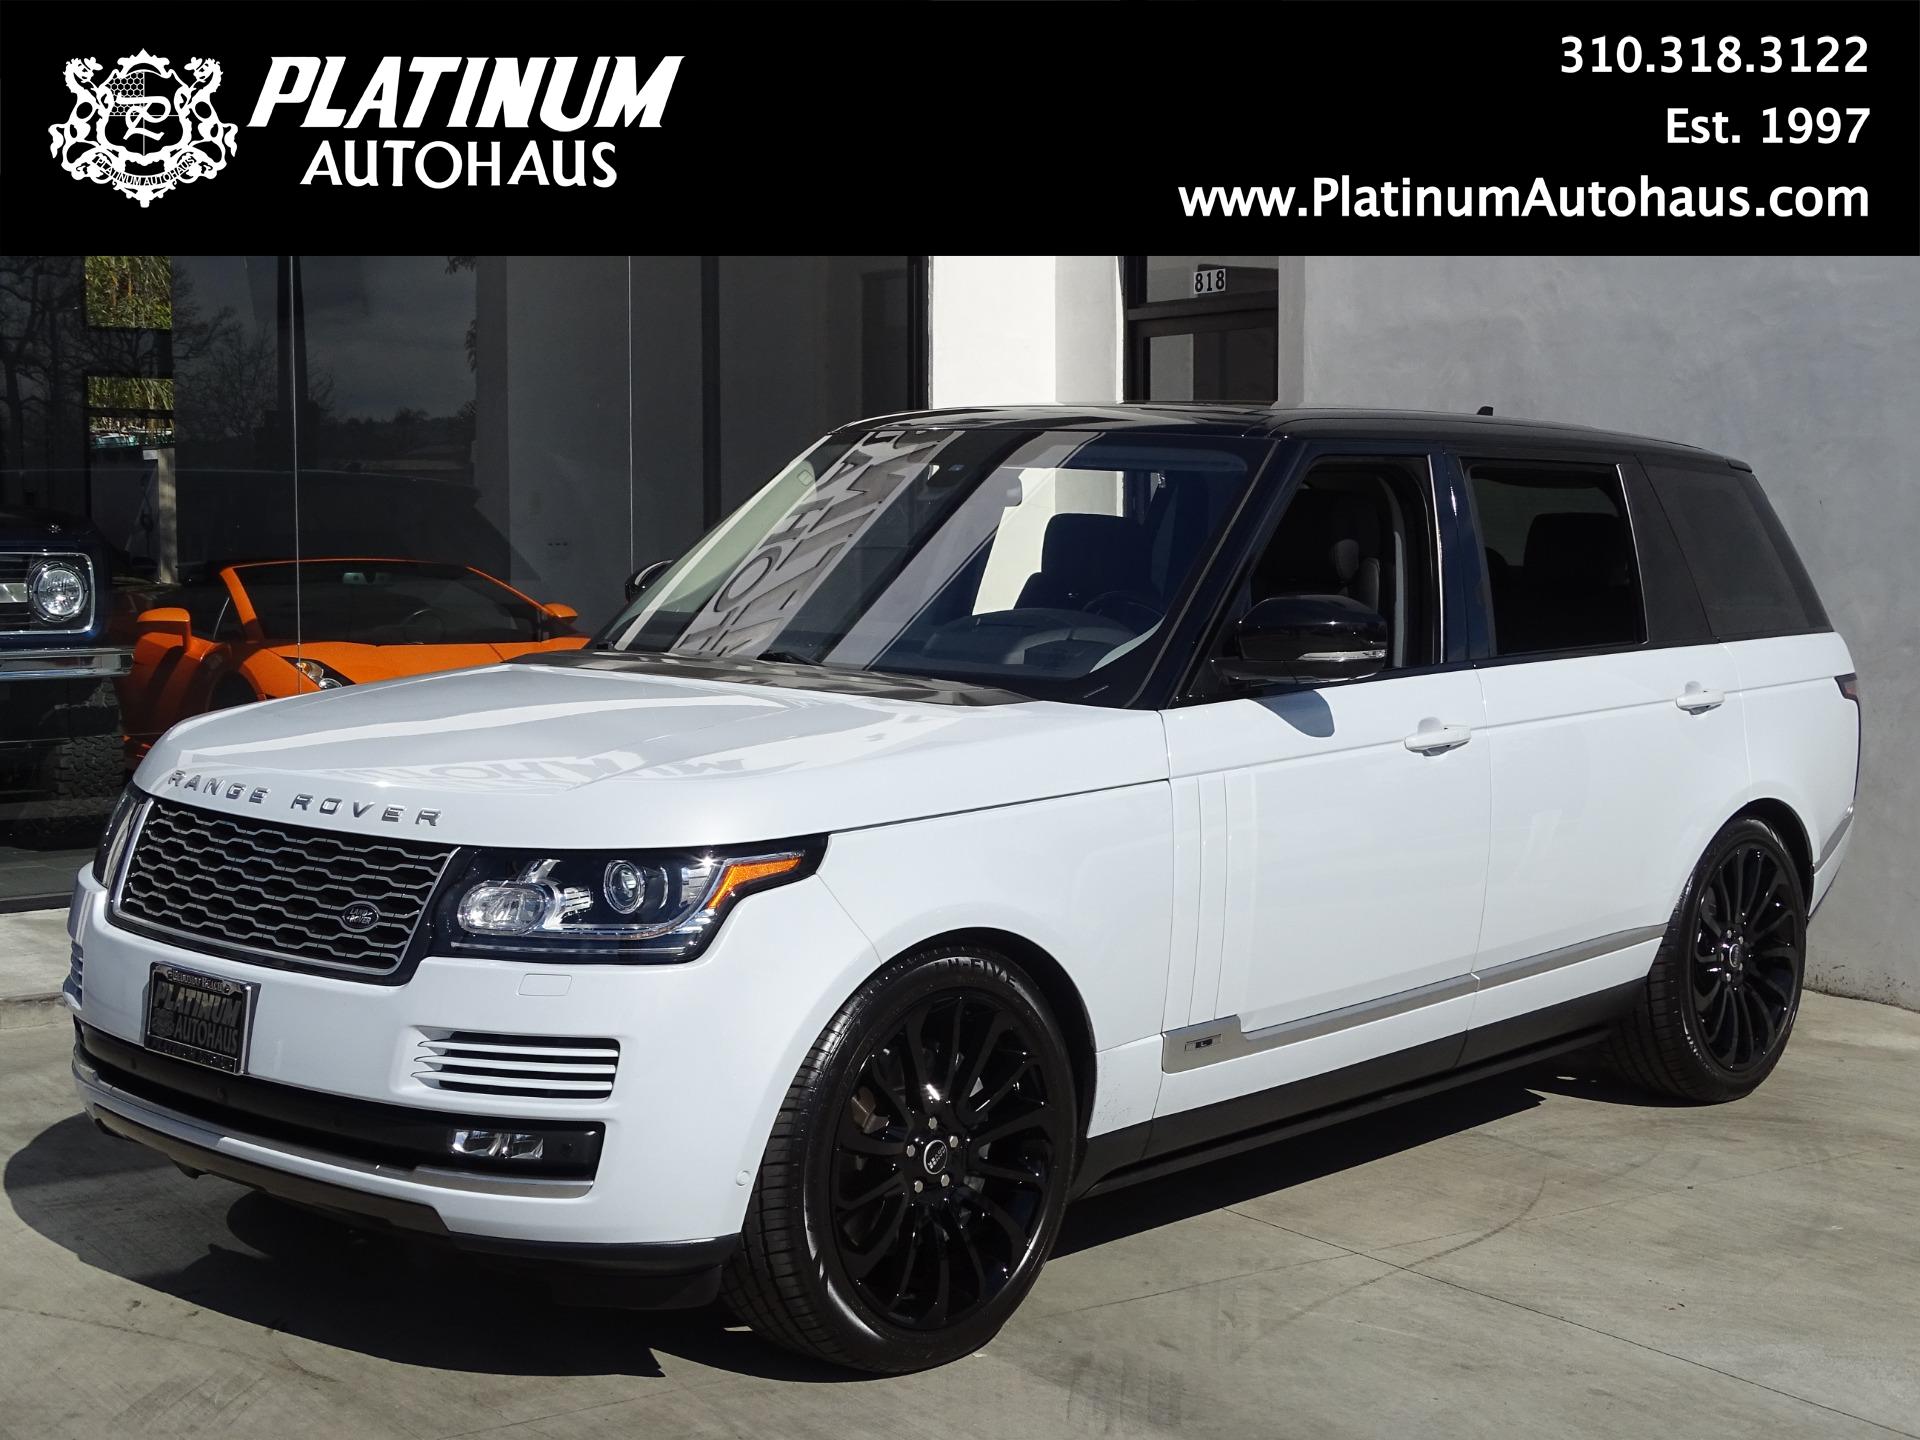 2016 Land Rover Range Rover Supercharged Lwb Stock # 6805 For Sale Near  Redondo Beach, Ca | Ca Land Rover Dealer